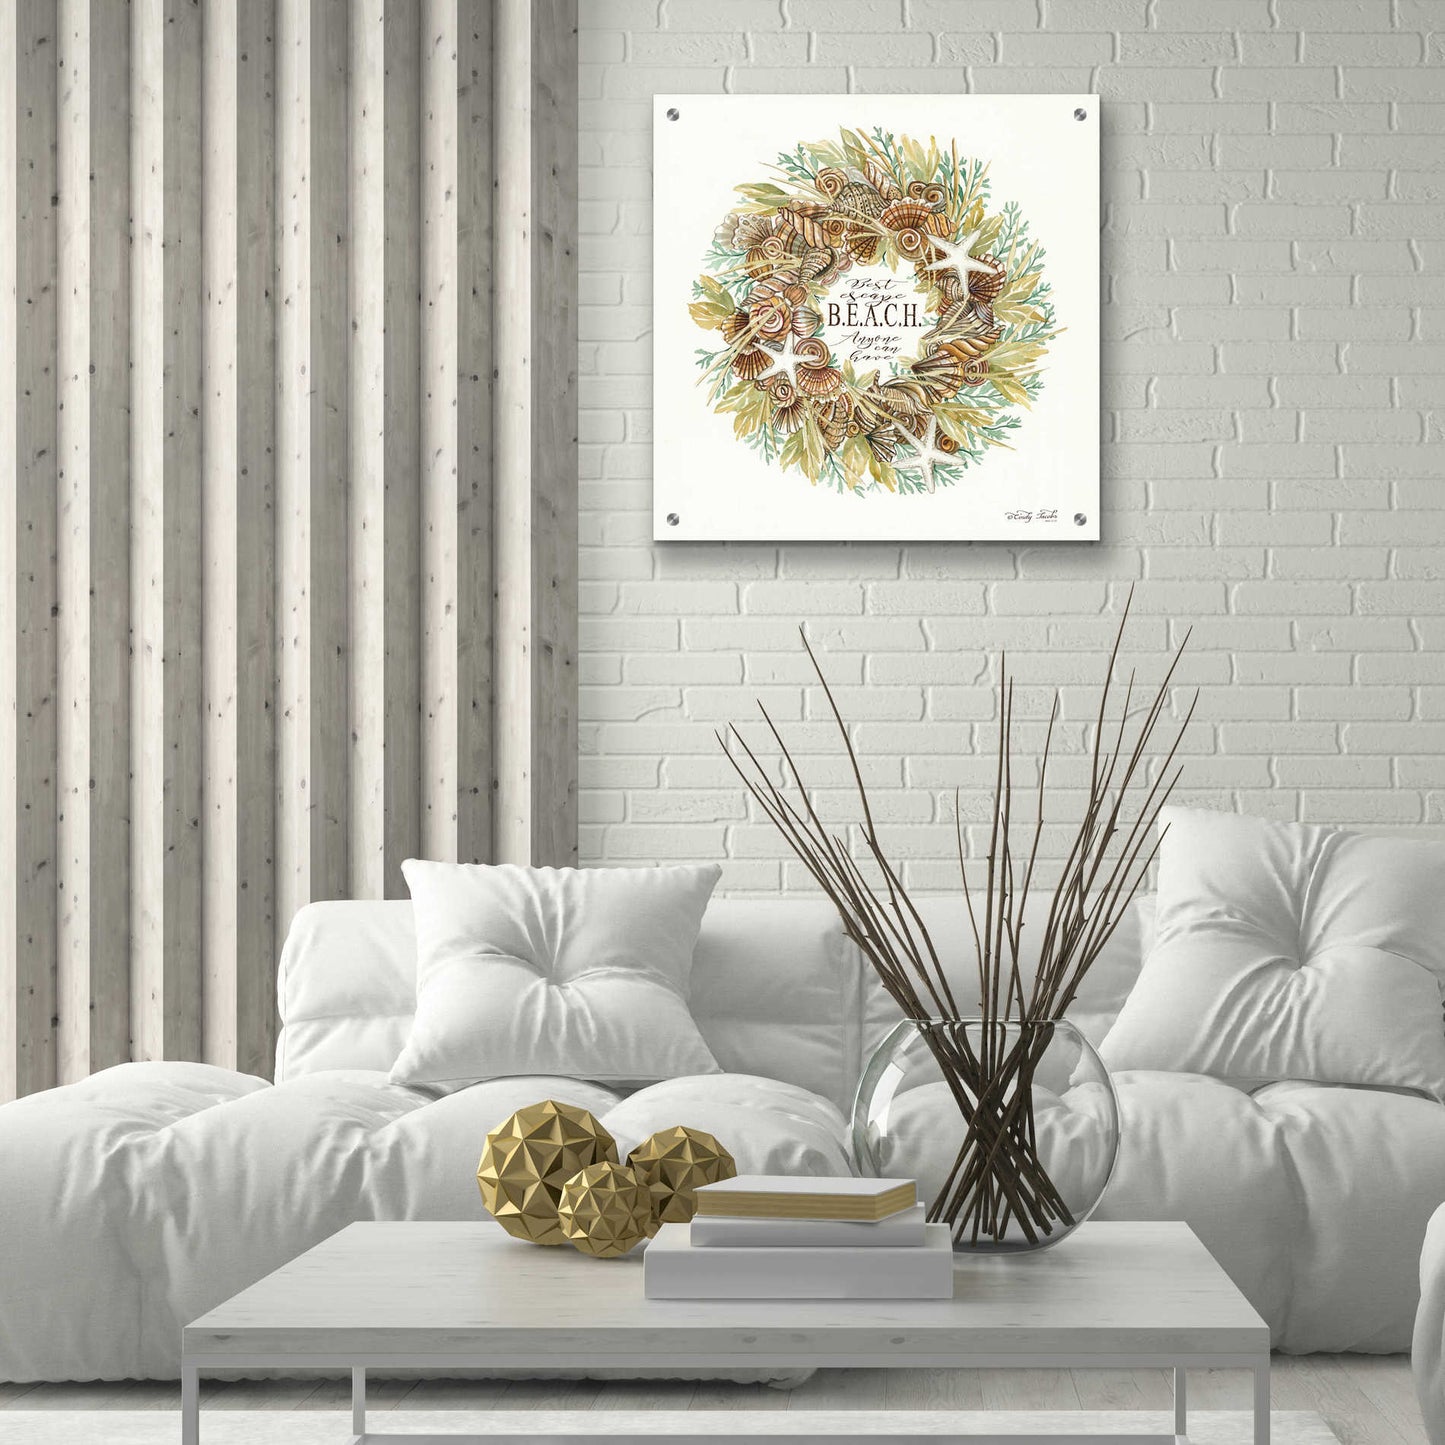 Epic Art 'Best Escape Shell Wreath' by Cindy Jacobs, Acrylic Glass Wall Art,24x24